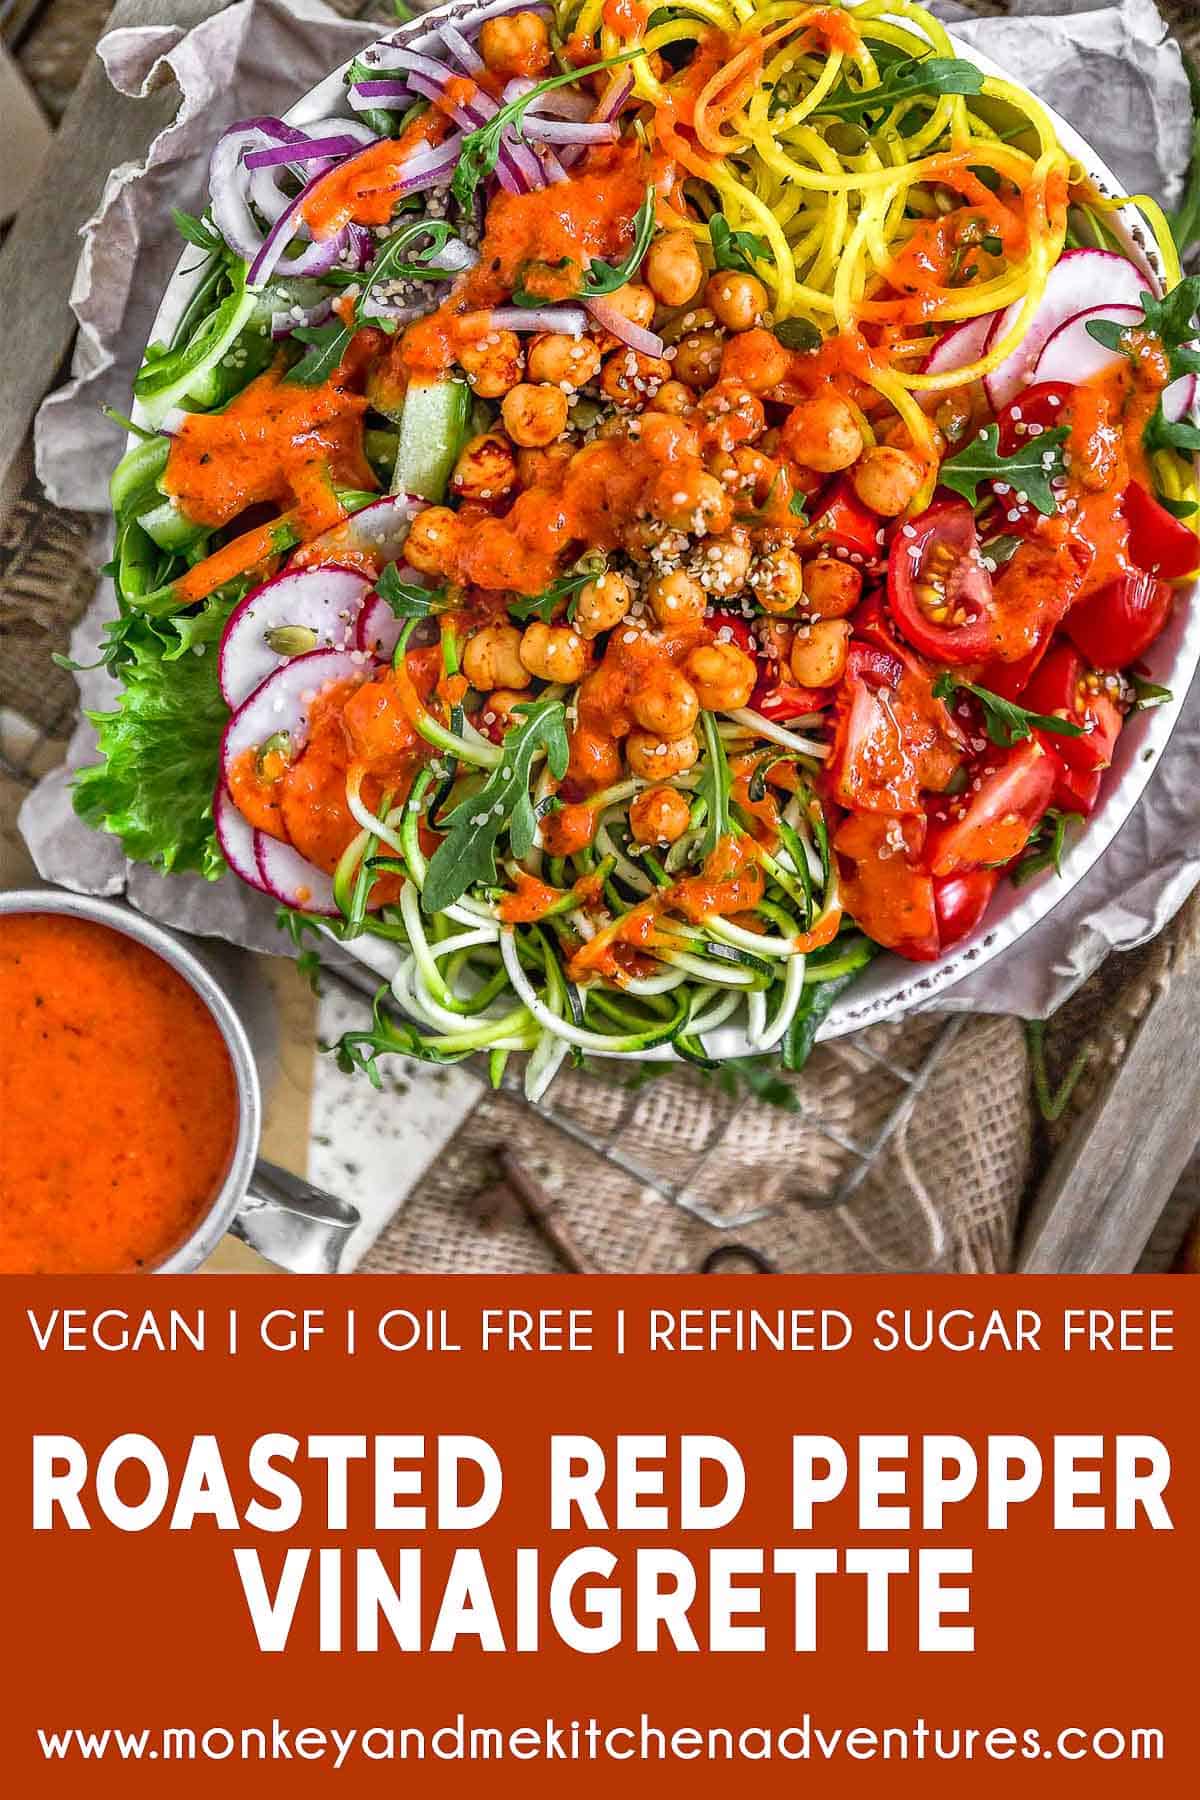 Roasted Red Pepper Vinaigrette with text description